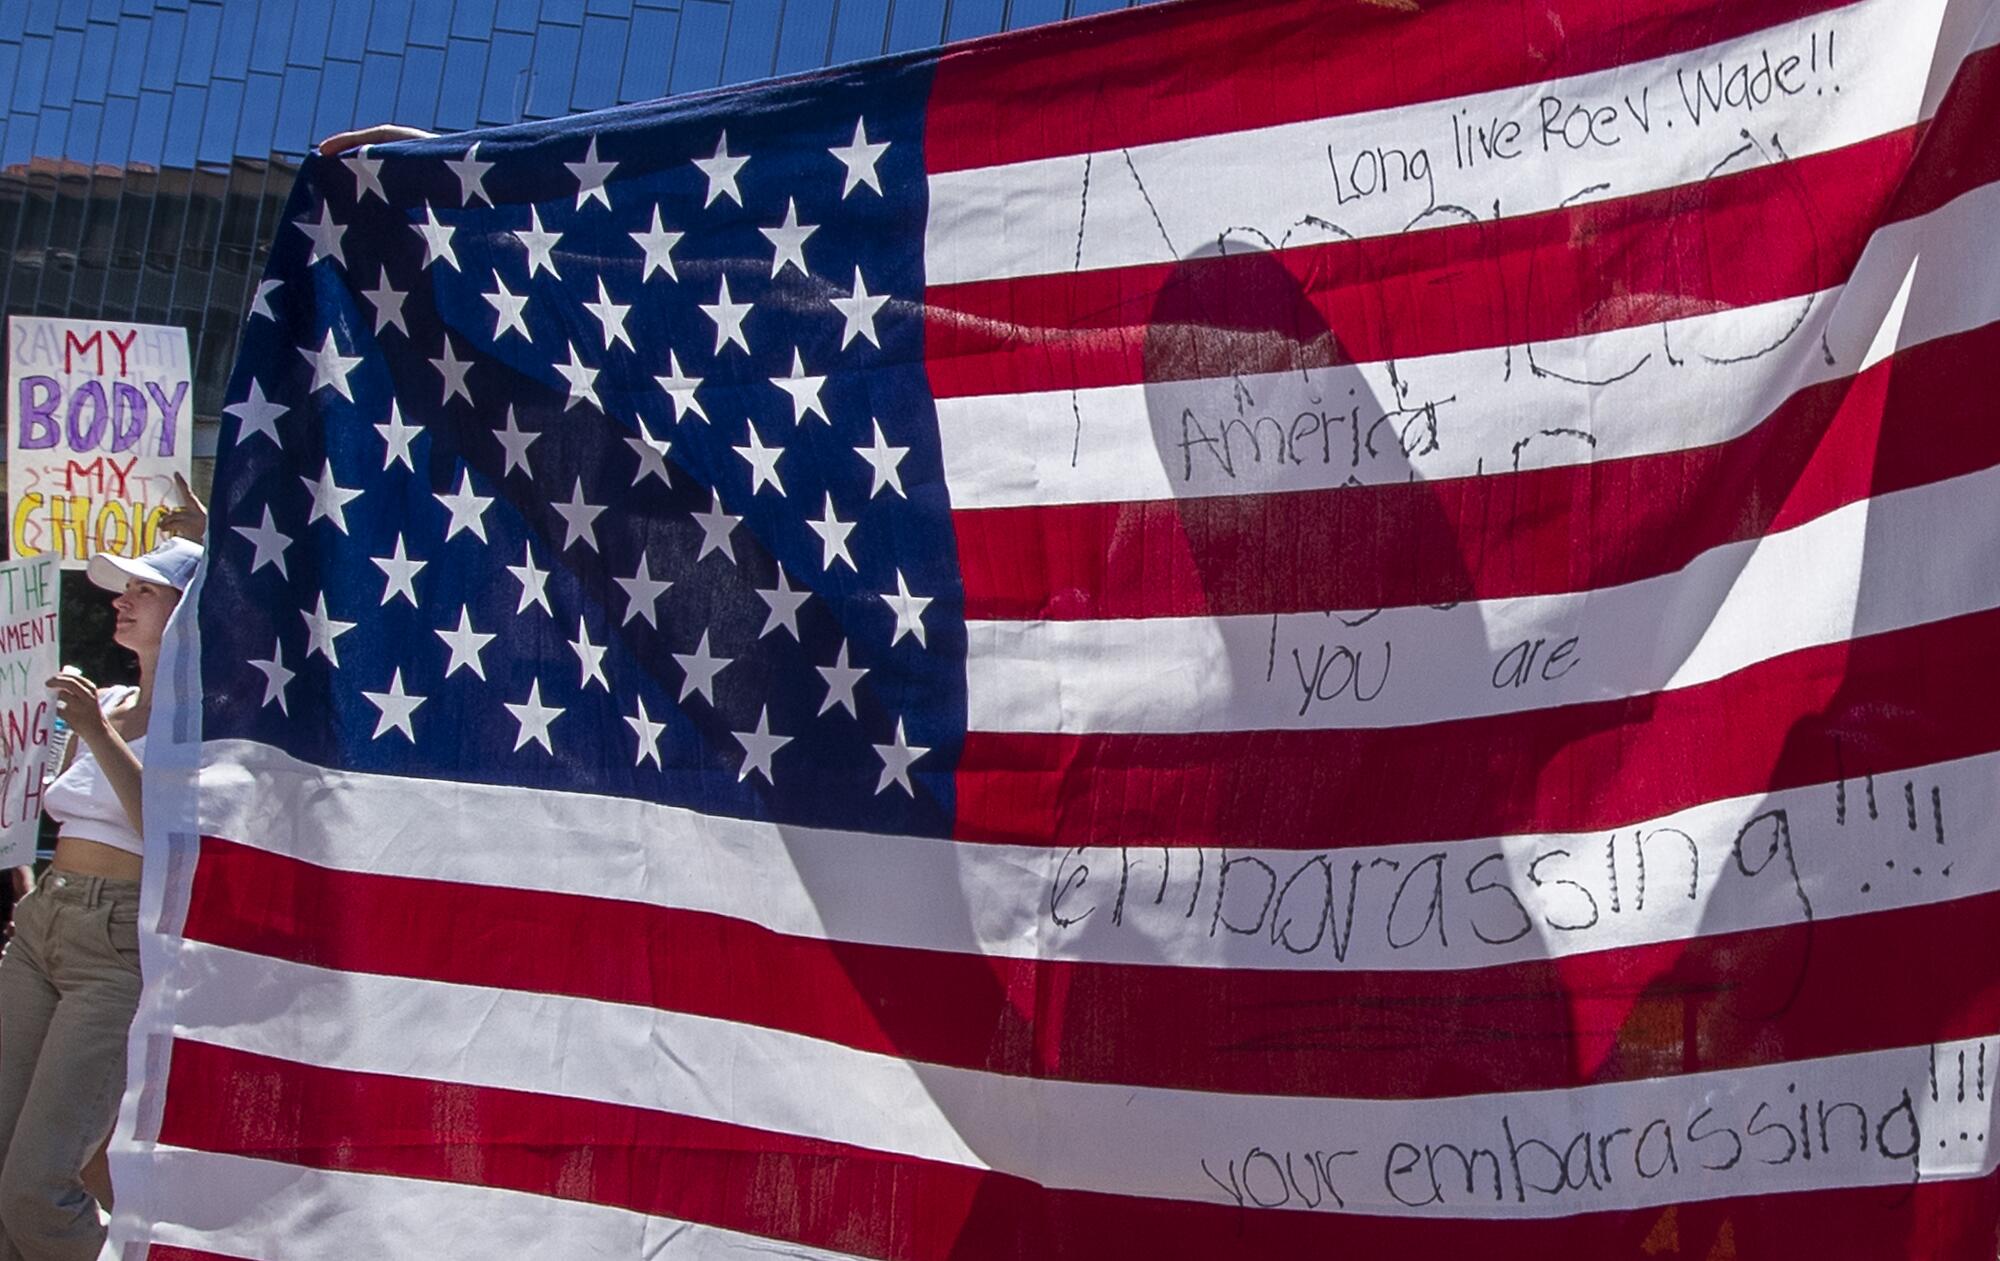 A protester is silhouetted while holding an American flag on which a message has been scrawled